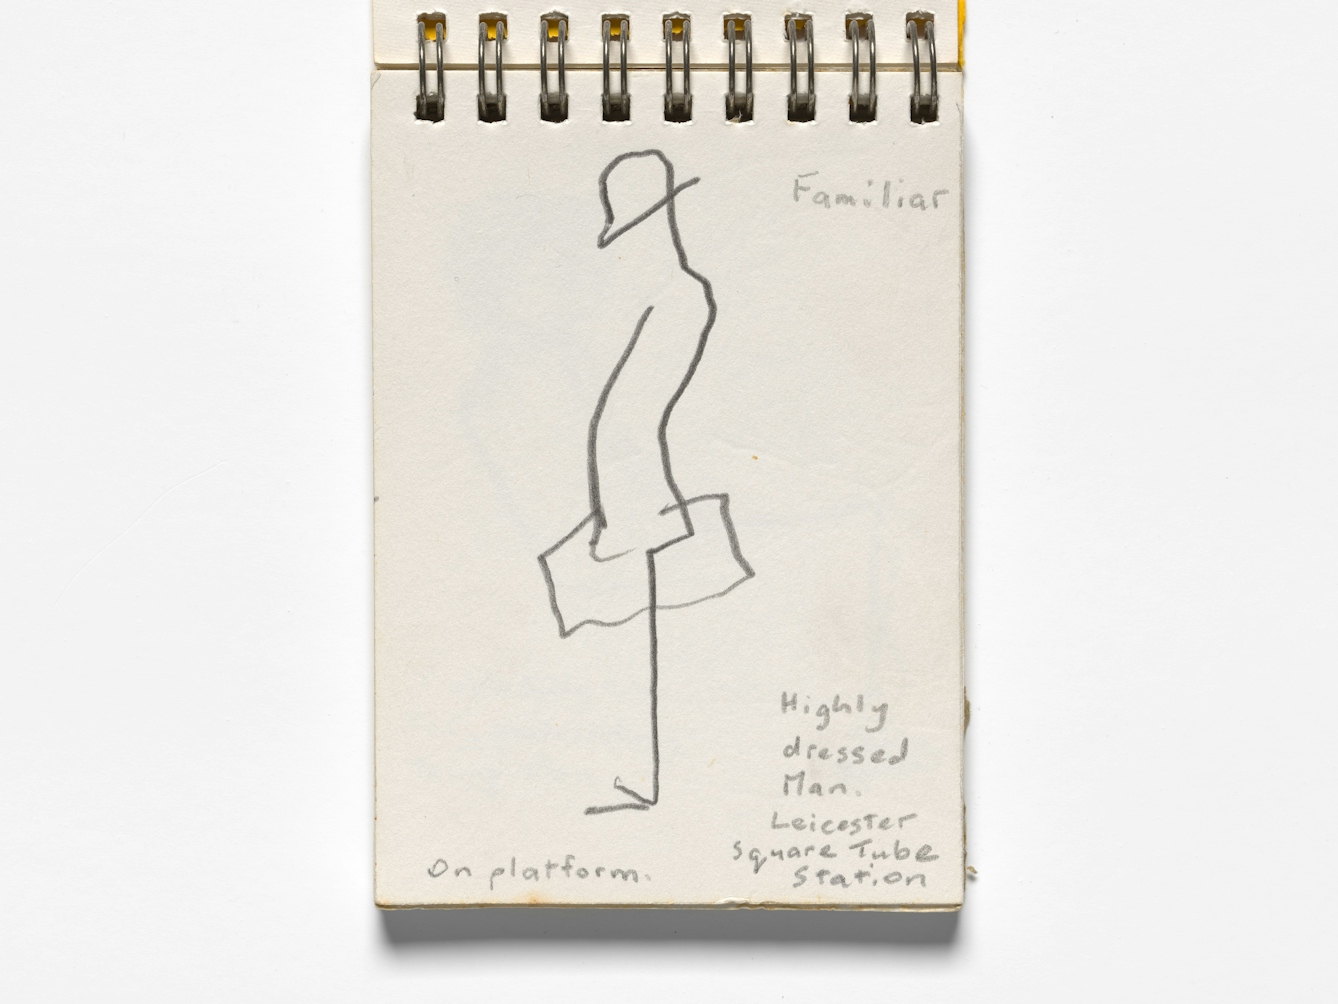 Photograph of an open sketchbook on a white background.  A simple line sketch is visible, showing a man in a hat, carrying a case, stood on a station platform. Although only made up of a few lines, the sketch conveys a sense of waiting and contemplative thought. The sketch is hand annotated with the words, 'Familiar, Highly dressed man. Leicester Square Tube Station. On platform."